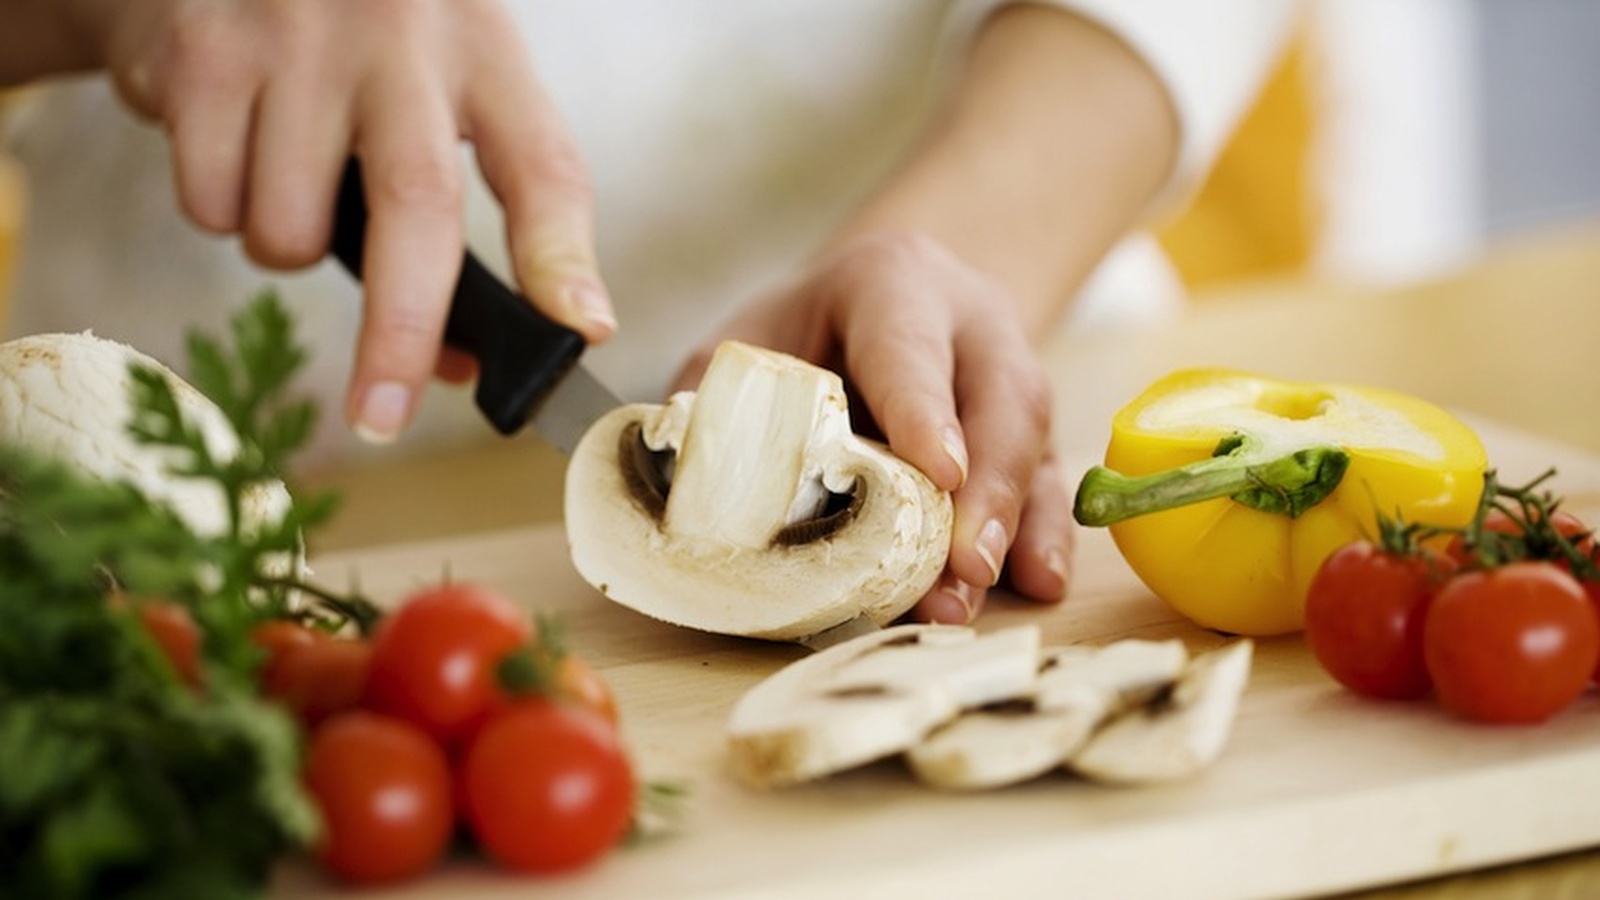 Our Top 5 Essential Kitchen Tools For Healthy Eating